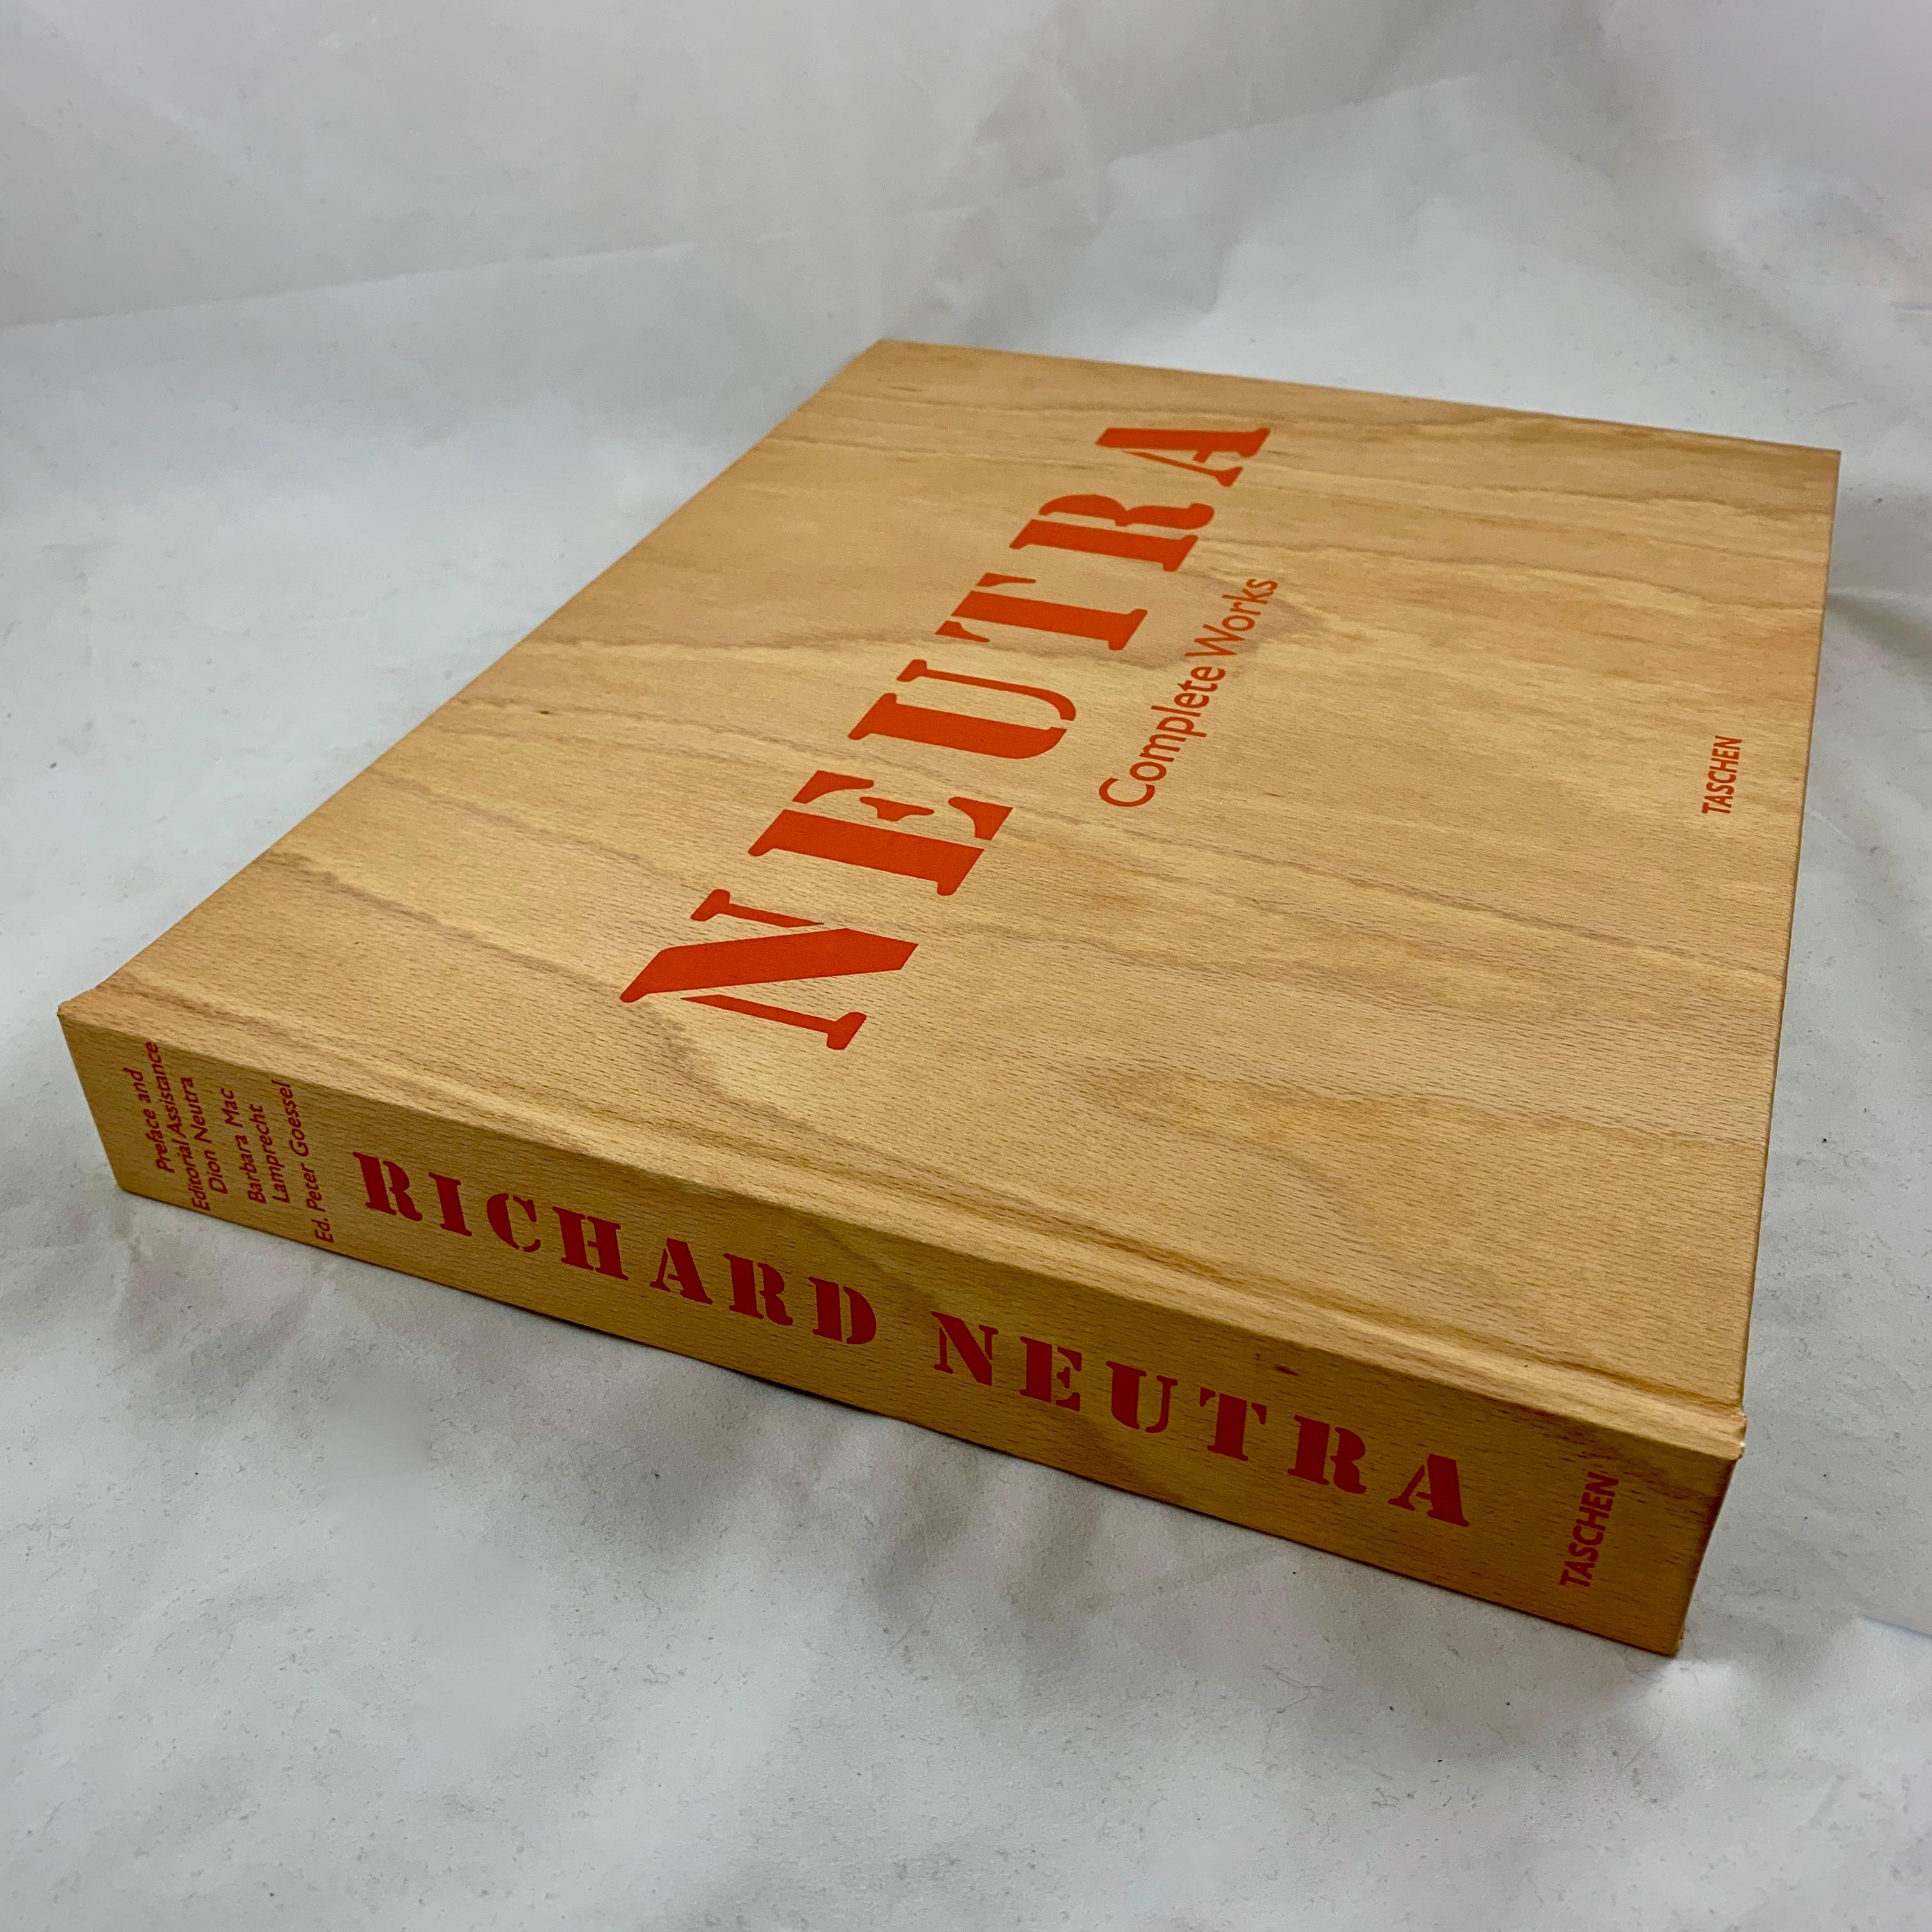 The definitive volume on the Viennese-born architect with a wood bound cover and the original box. The book outlines all of Neutra’s works, nearly 300 private homes, schools, and public buildings, illustrated with over 1,000